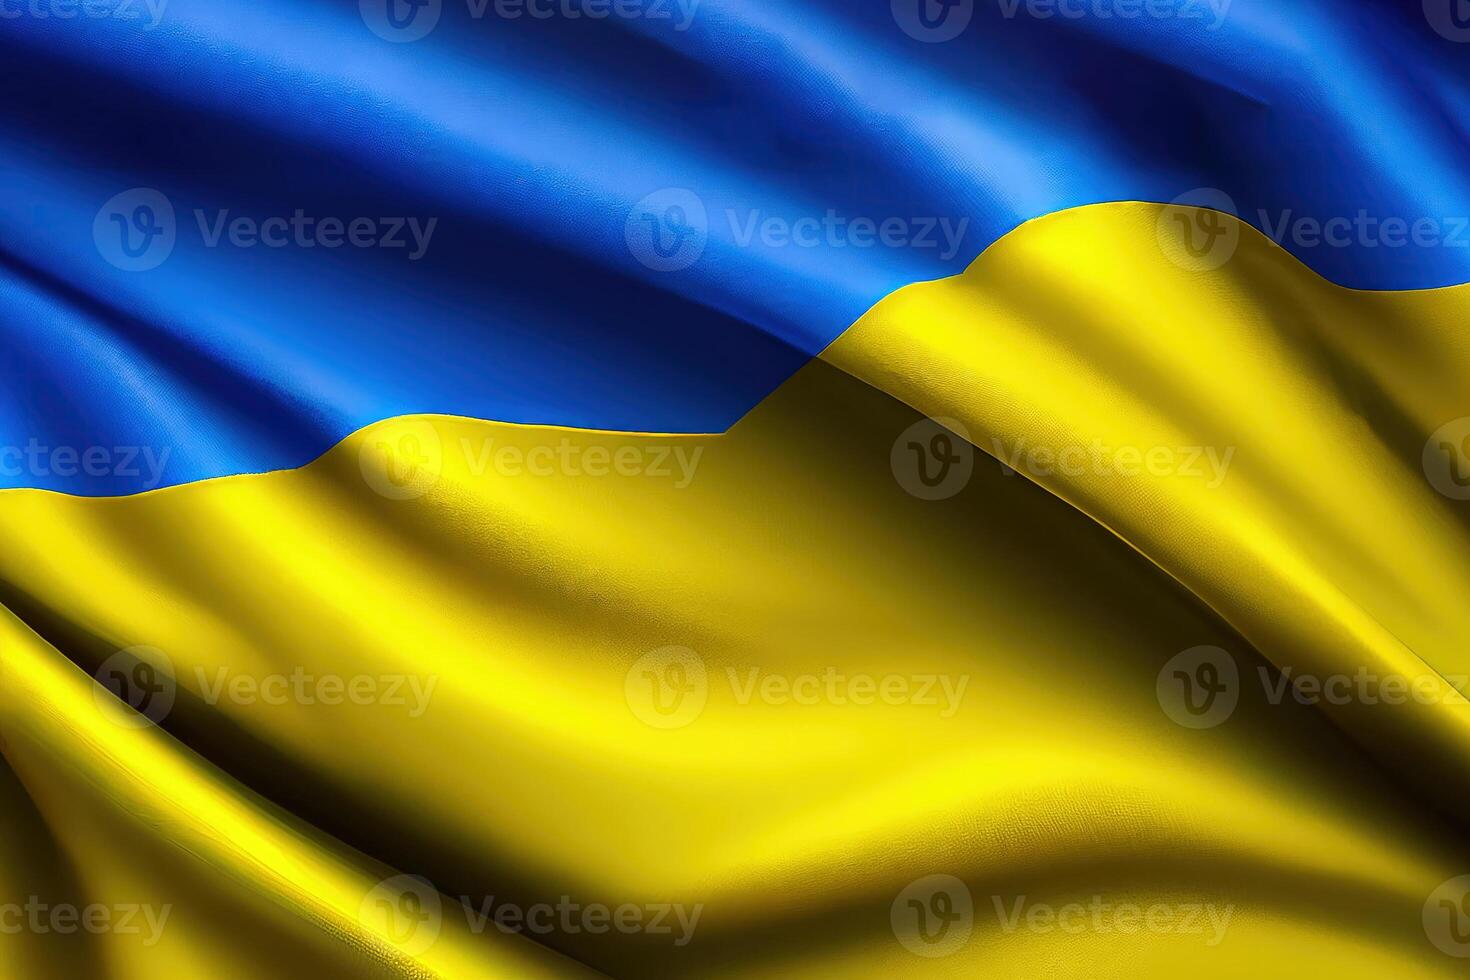 The flag of ukraine sways in the wind. Wallpaper, background, poster, postcard, banner, emblem - photo